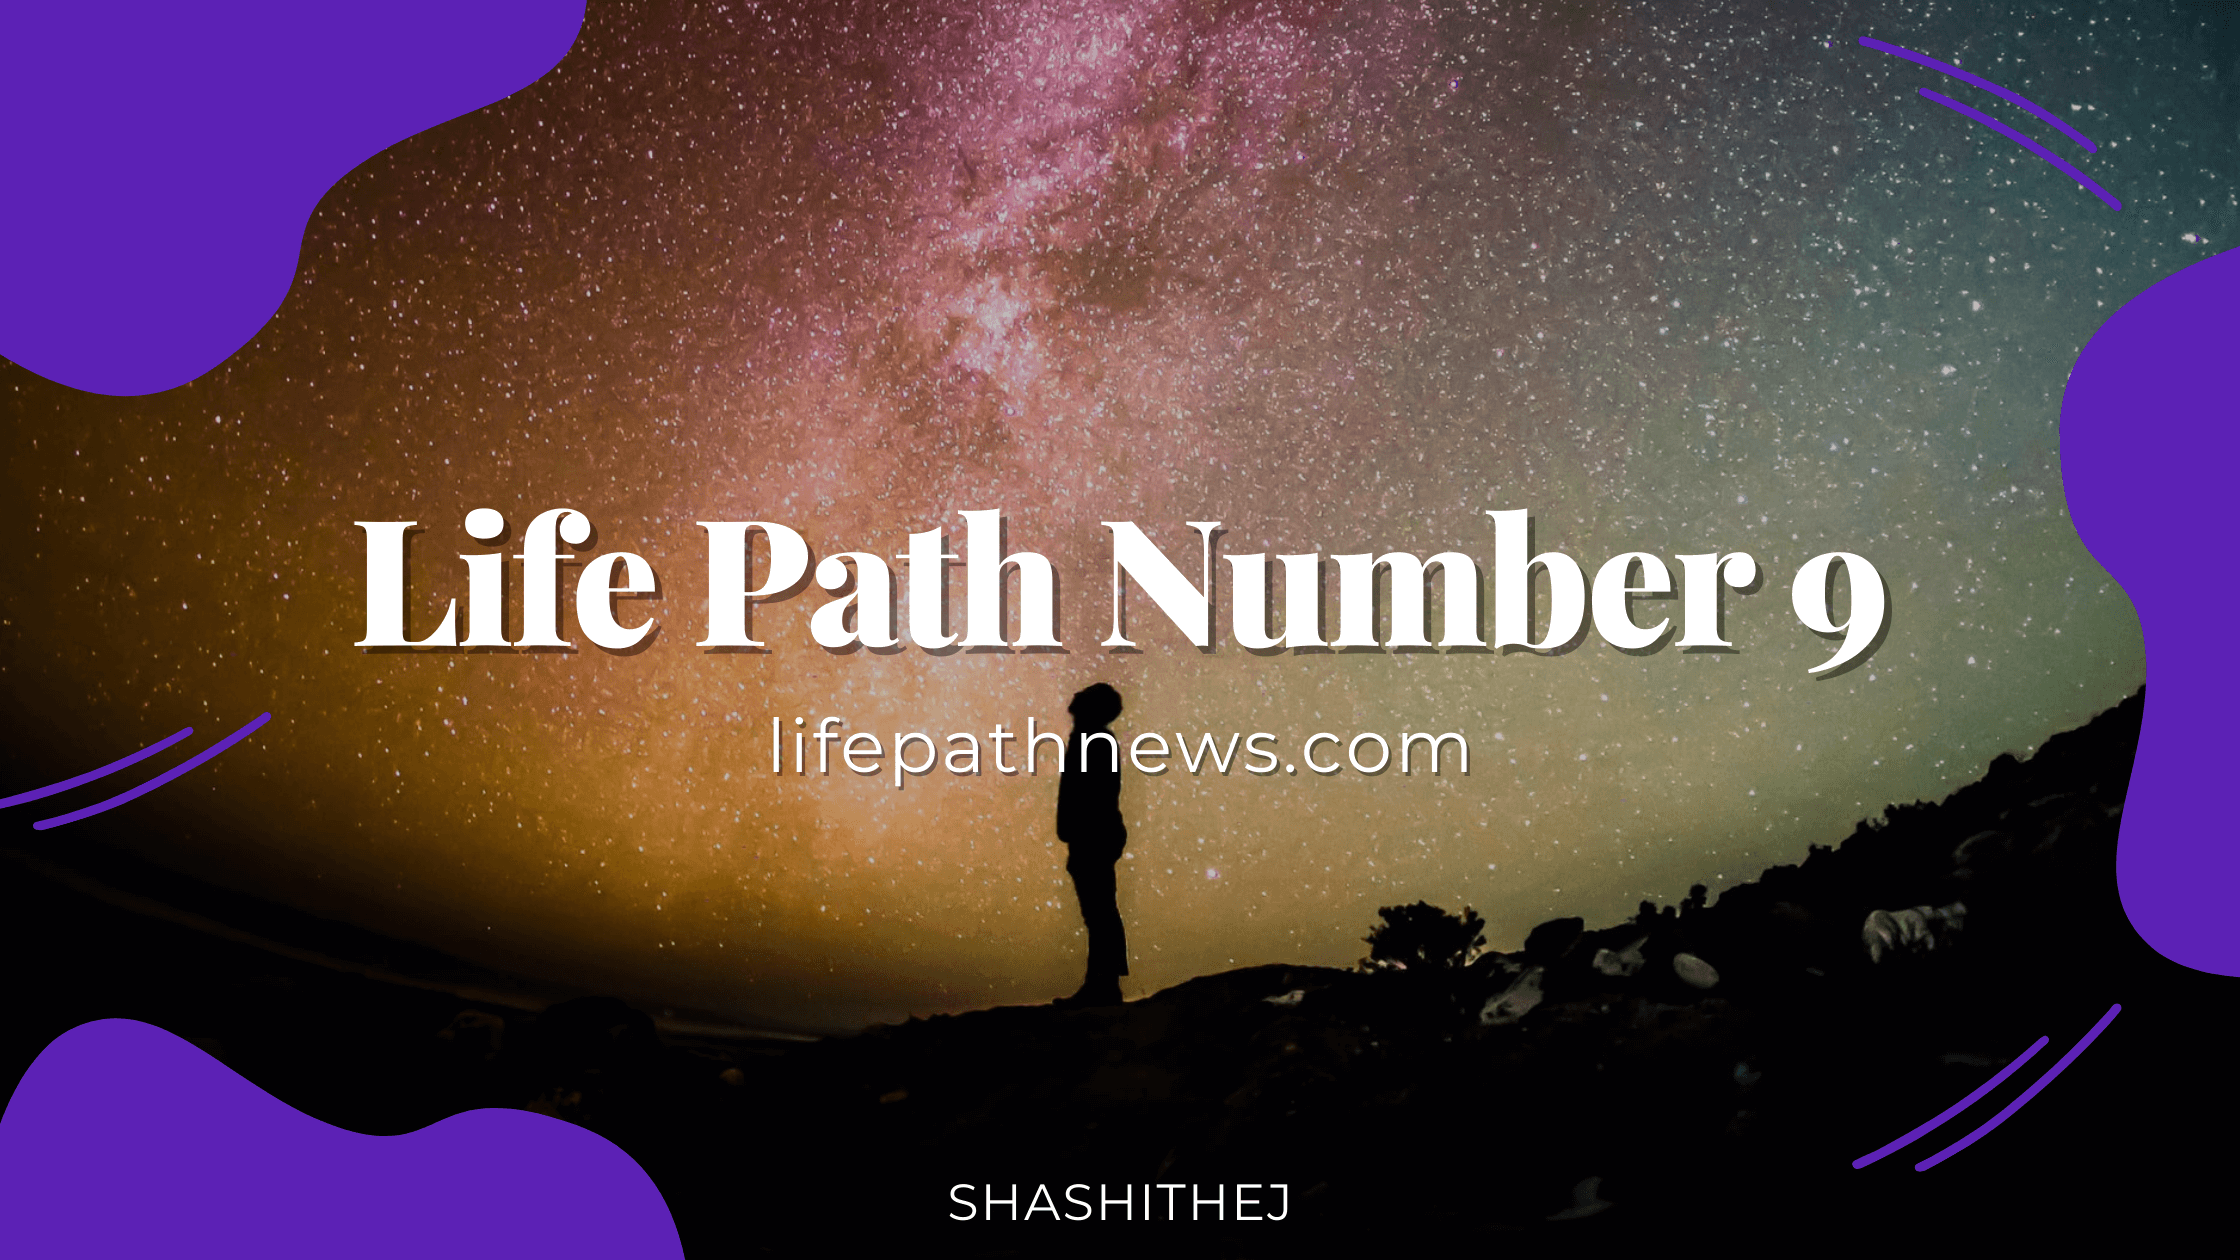 Life Path Number 9